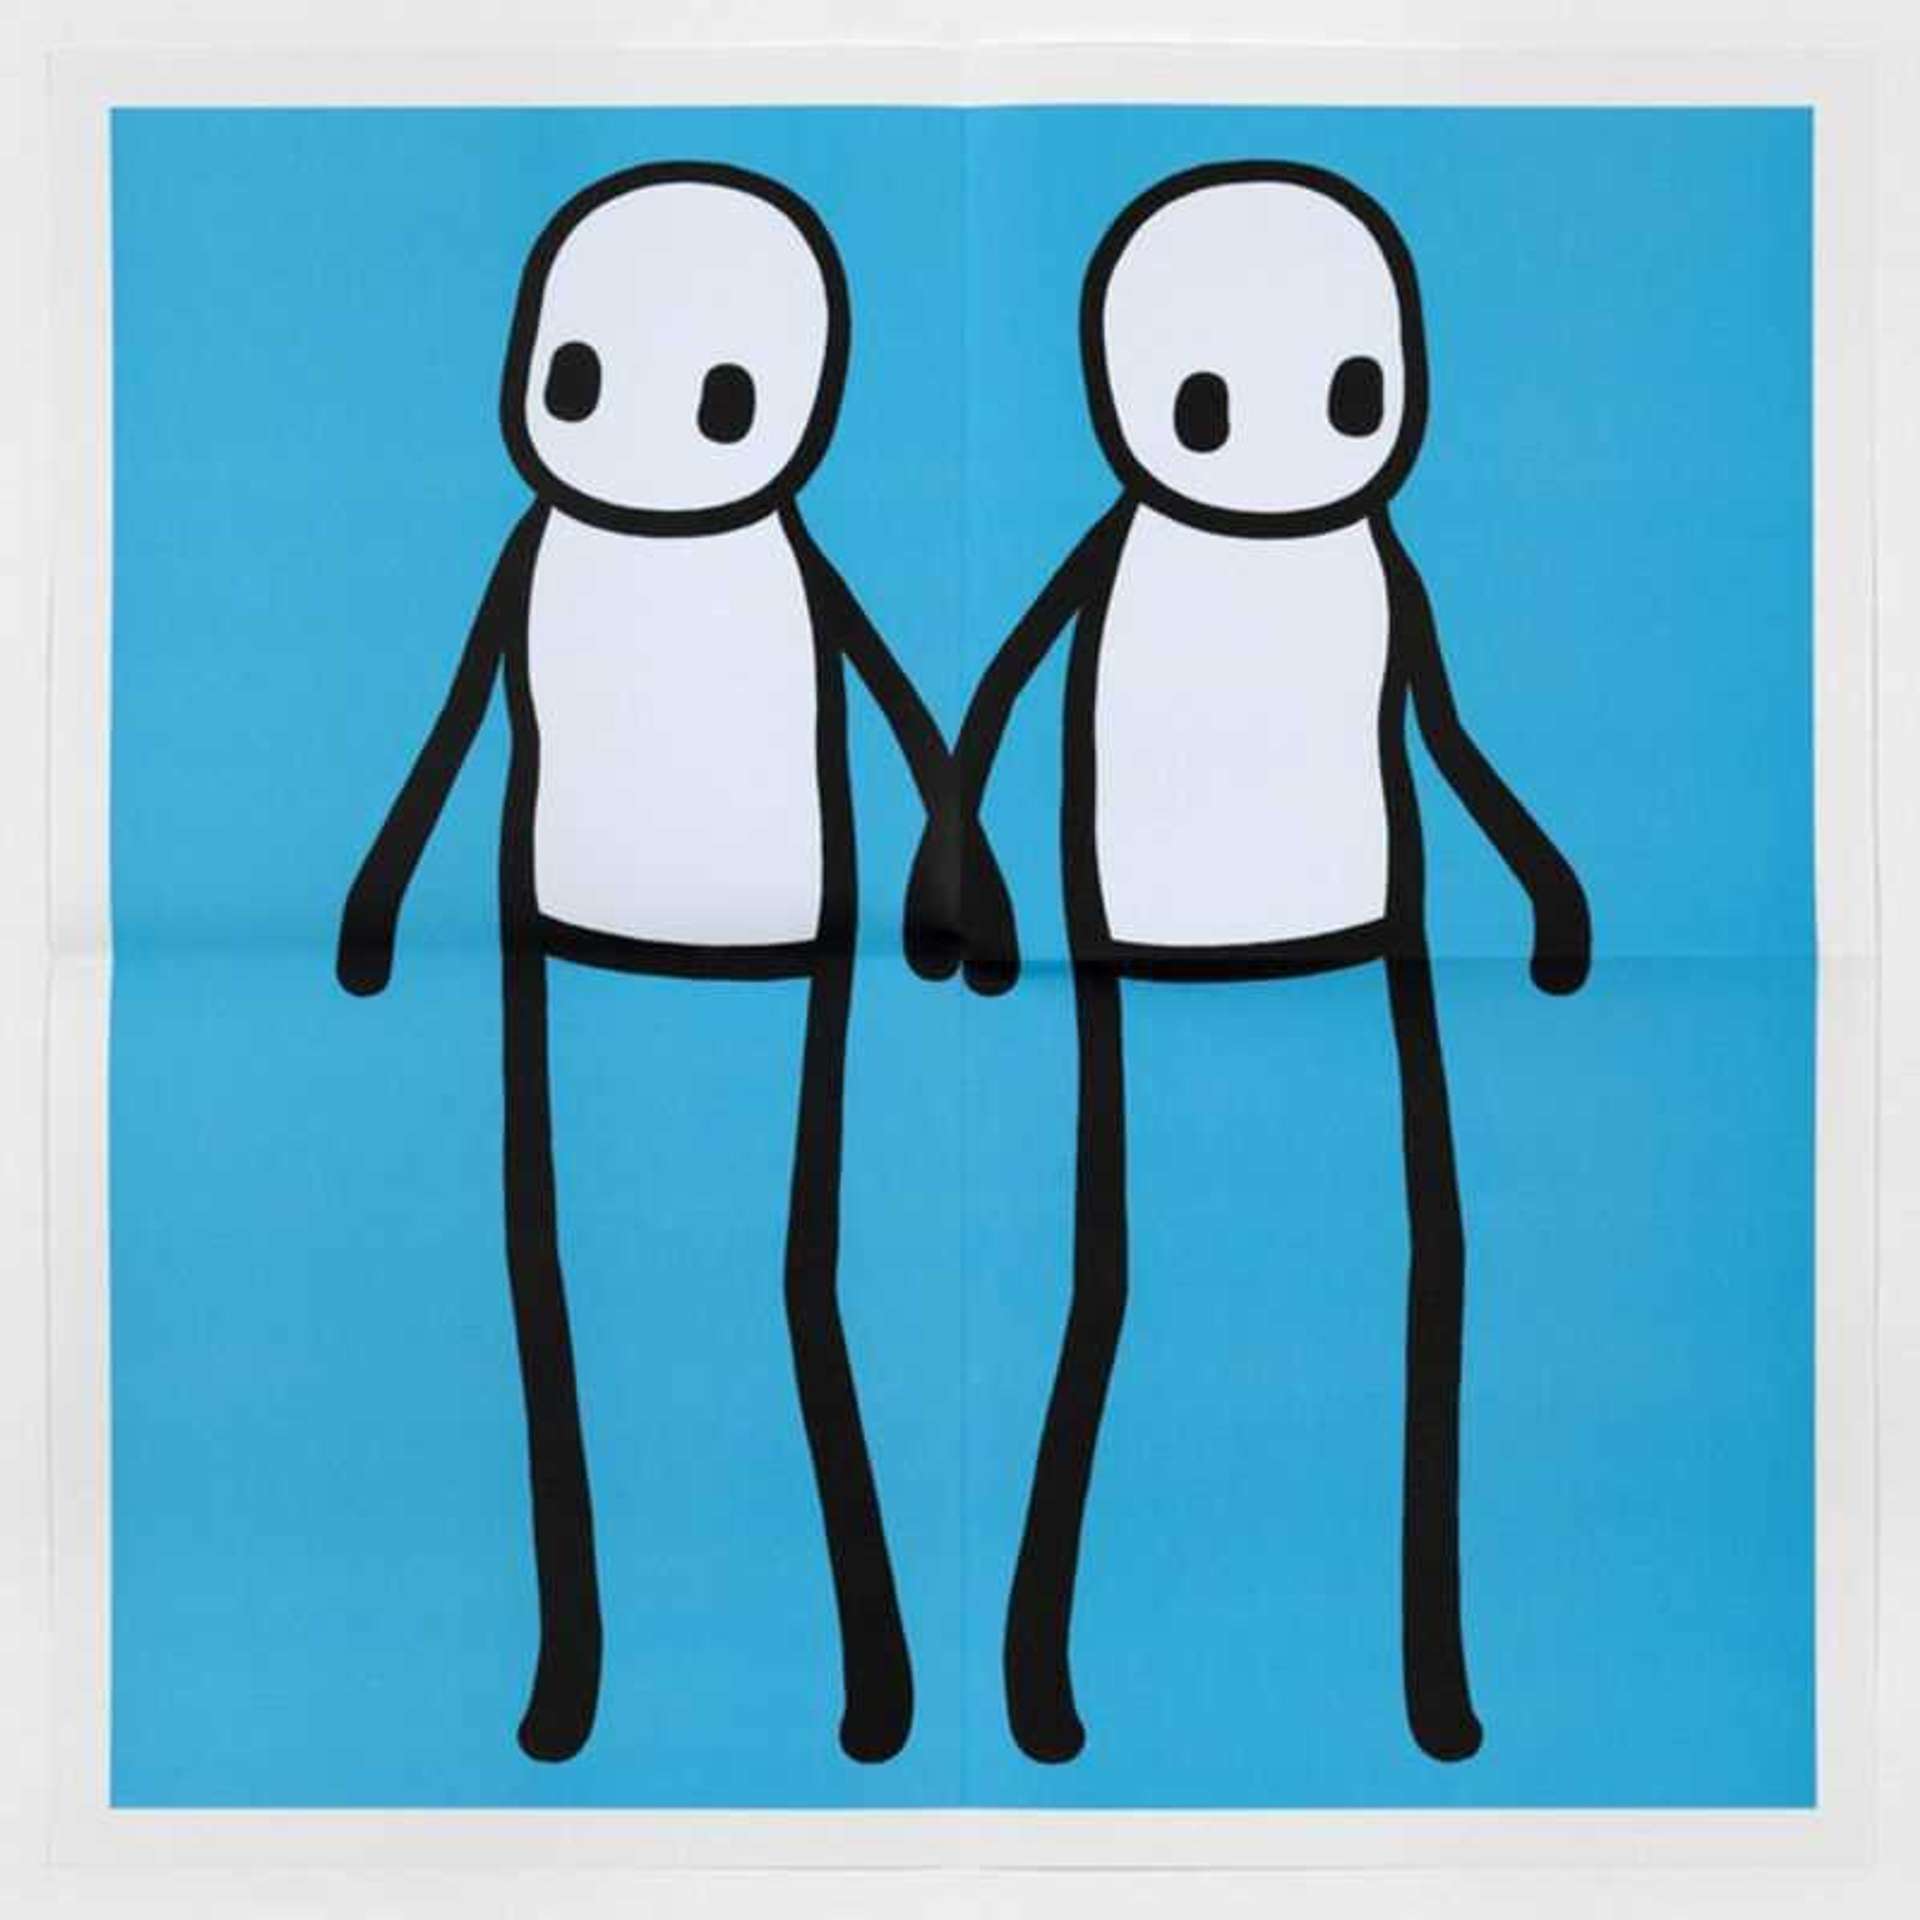 Holding Hands by Stik